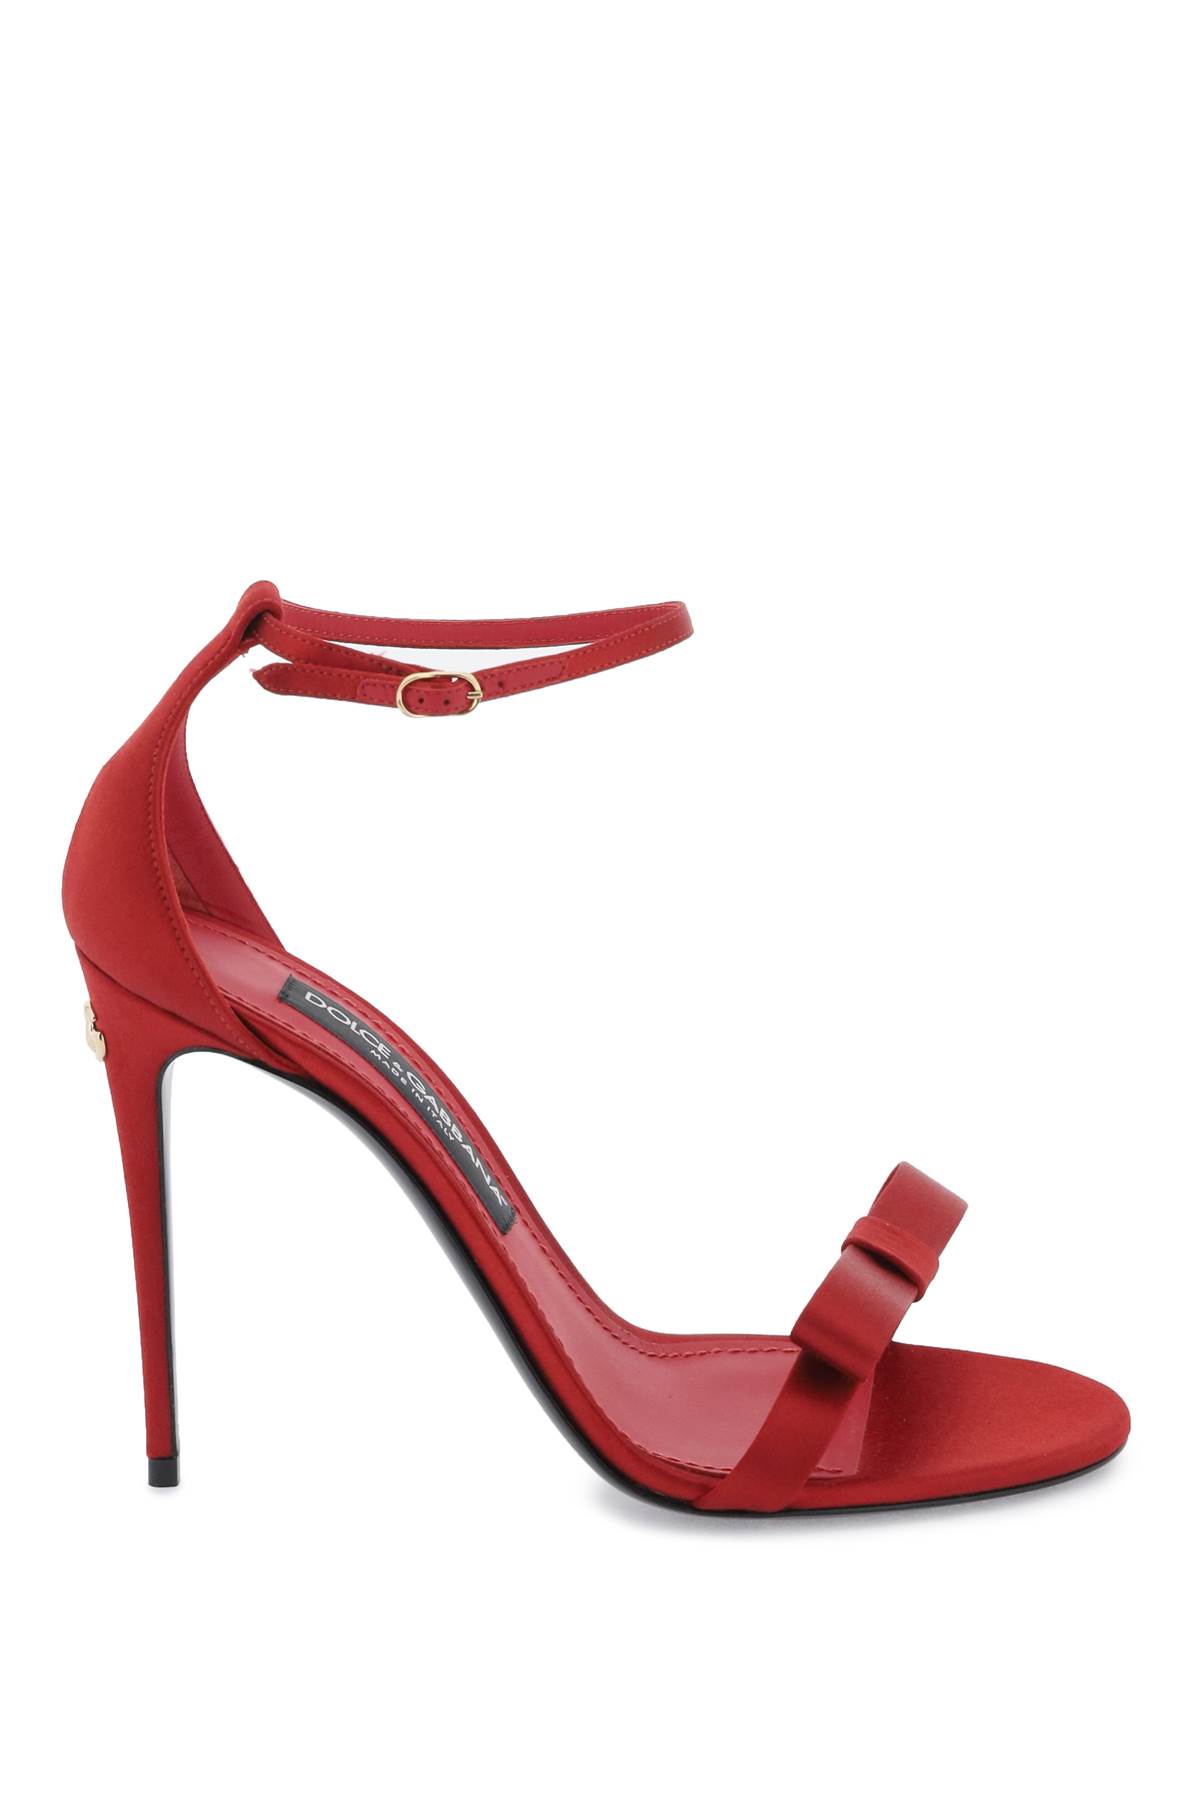 Shop Dolce & Gabbana Satin Sandals In Rosso Scuro 1 (red)